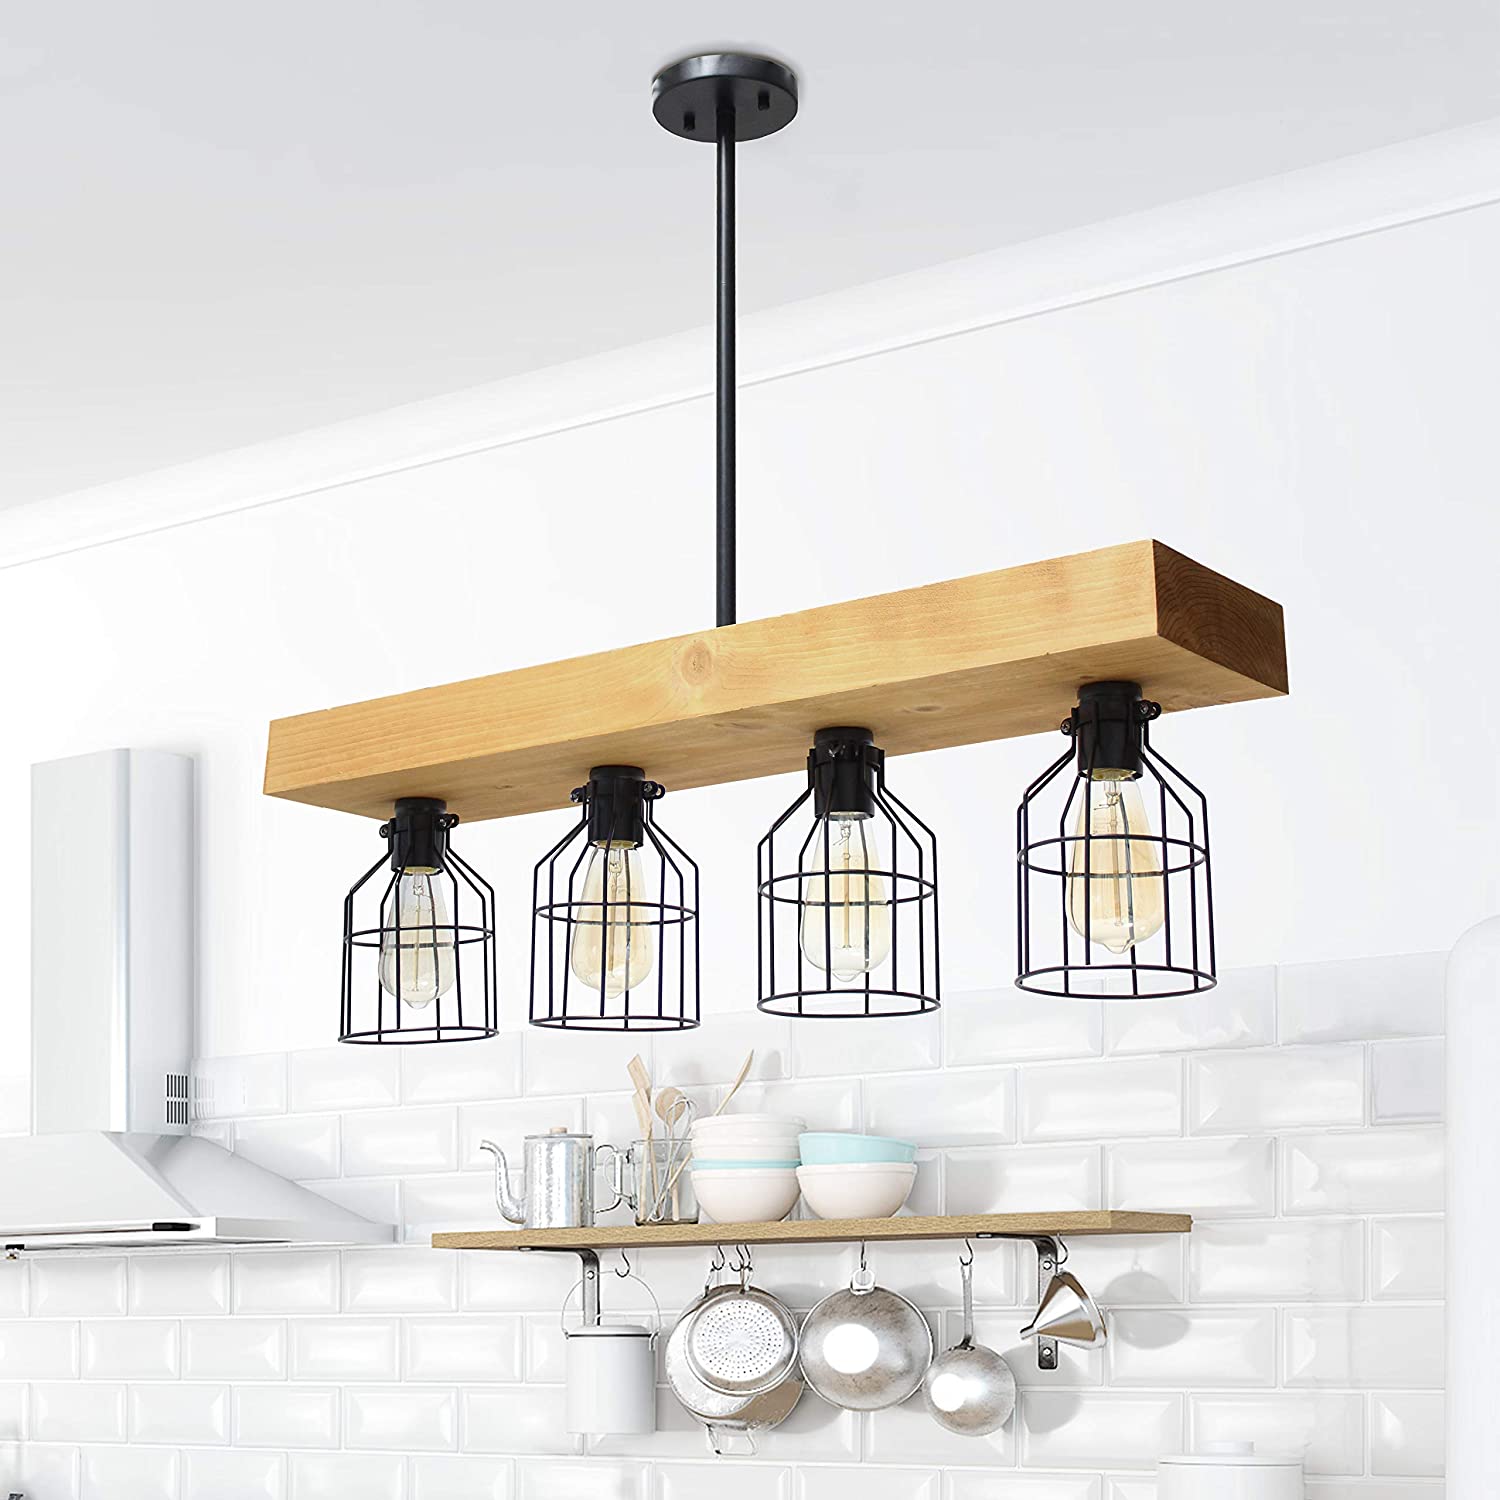 Elegant Designs CH1001-LWD 4 Light Rustic Farmhouse Industrial Wired Cage Pendant Island Light Chandelier, Light Wood